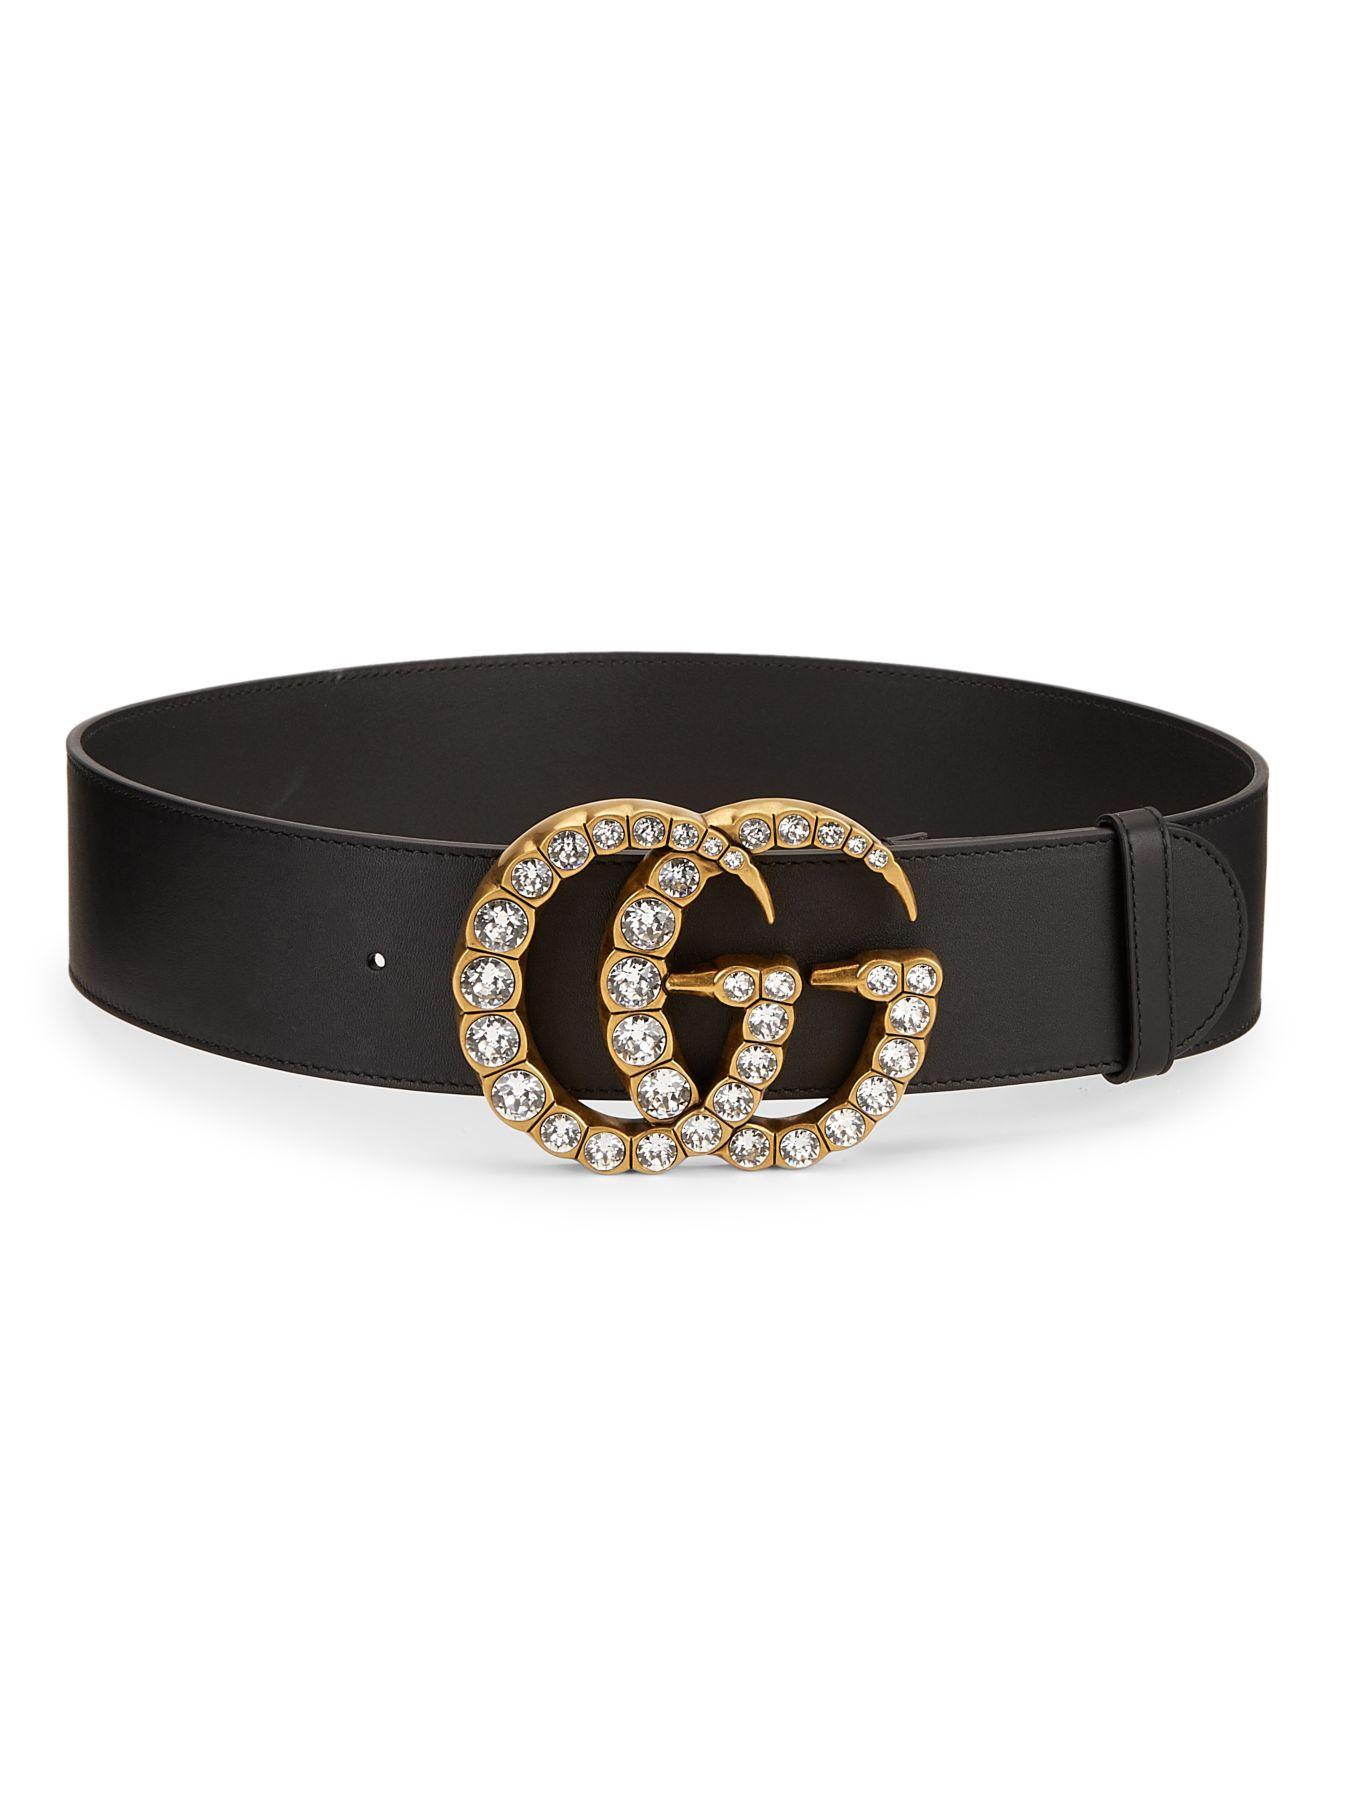 Gucci GG Leather & Crystal Belt in Black - Lyst